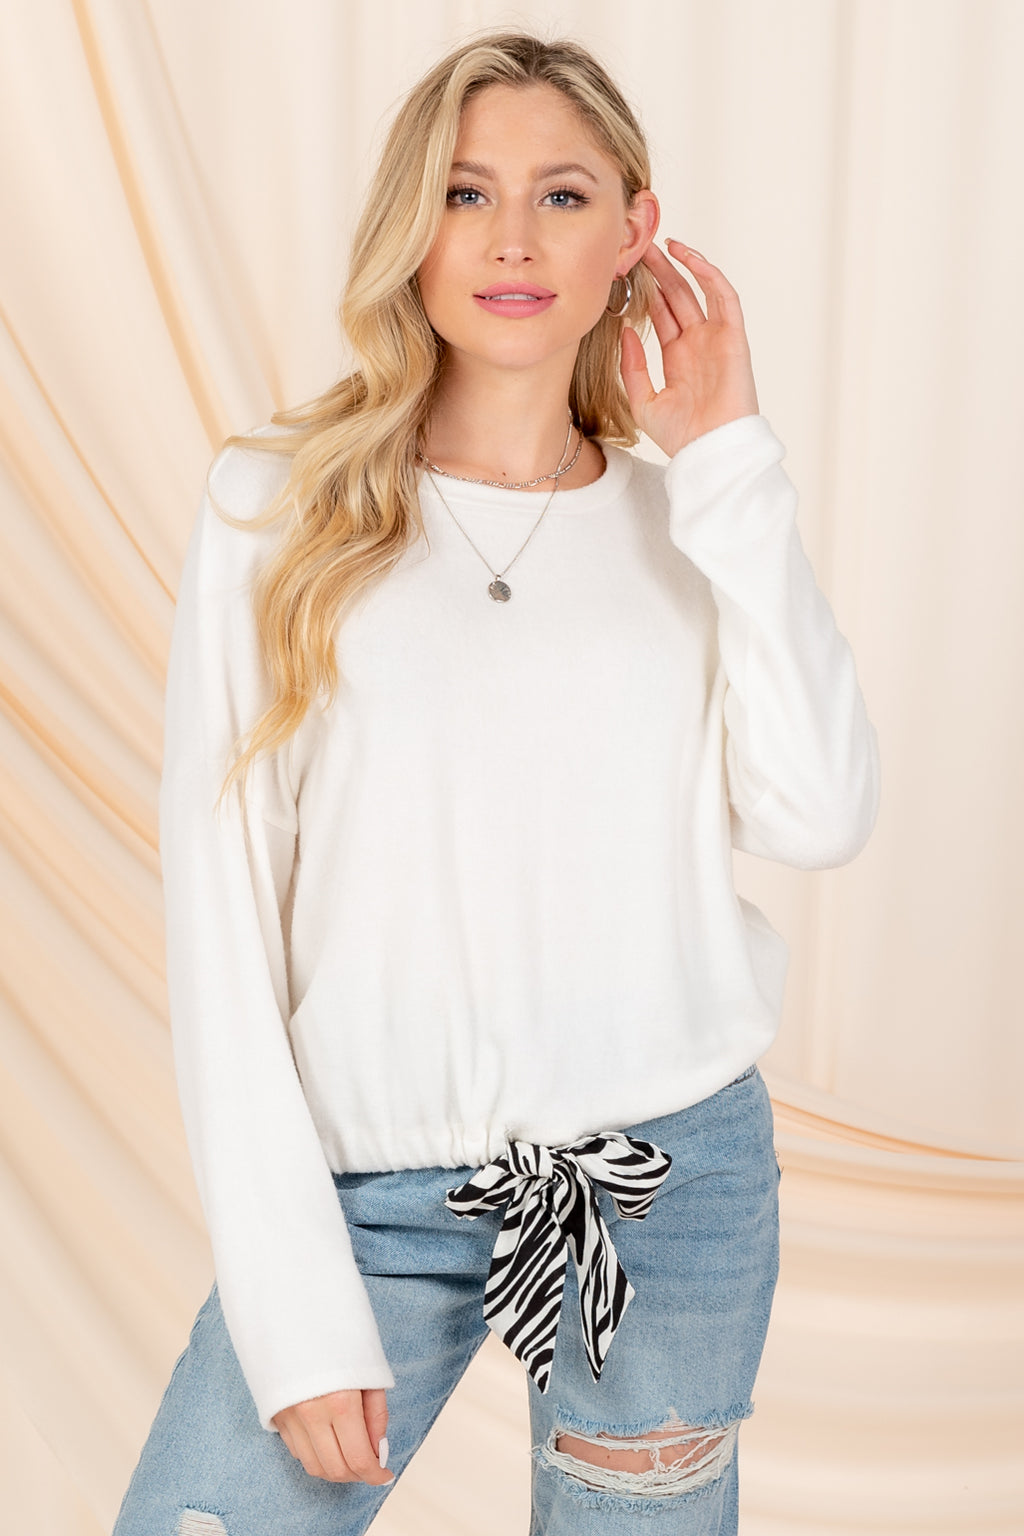 Women's Solid Knit Long Sleeves Top w/ Sash Contrast Bow